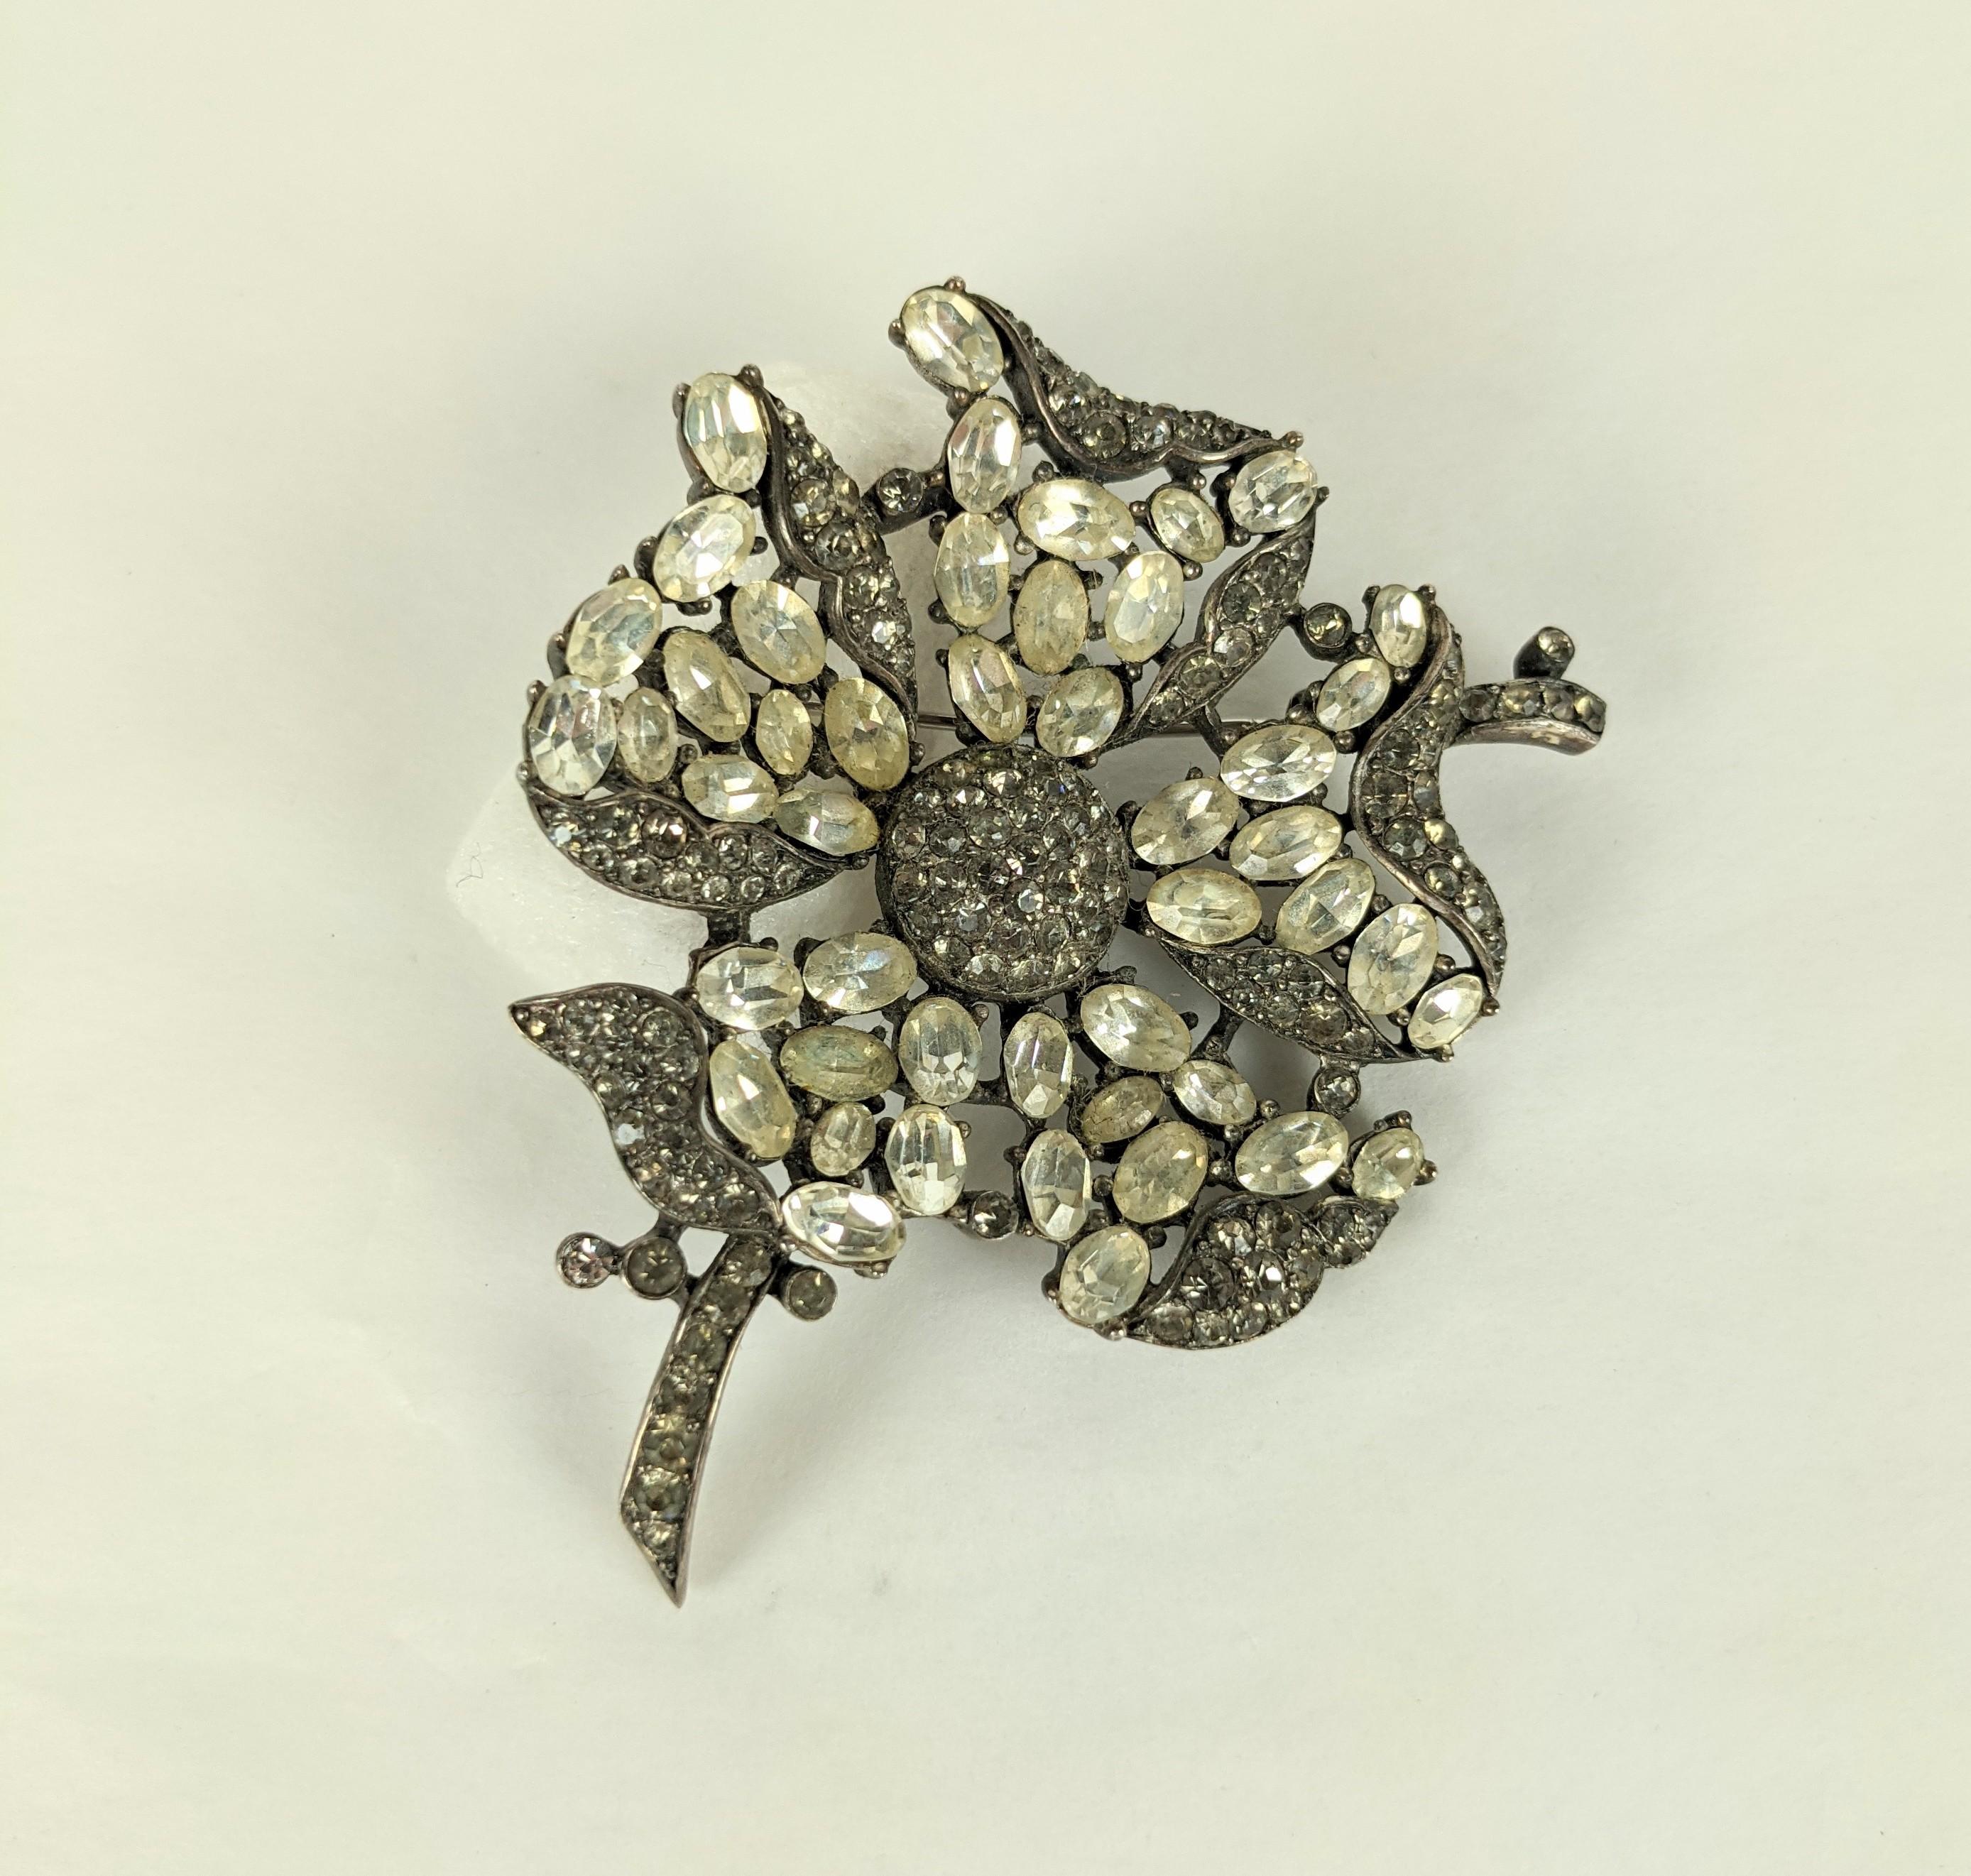 Trifari Crystal Flower Brooch of oval crystals with smoke crystal pave. This collectible Trifari series comes with either crystal or ruby ovals accented by grey crystal pave, very striking combination. 1960's USA. 
Signed Trifari.  2